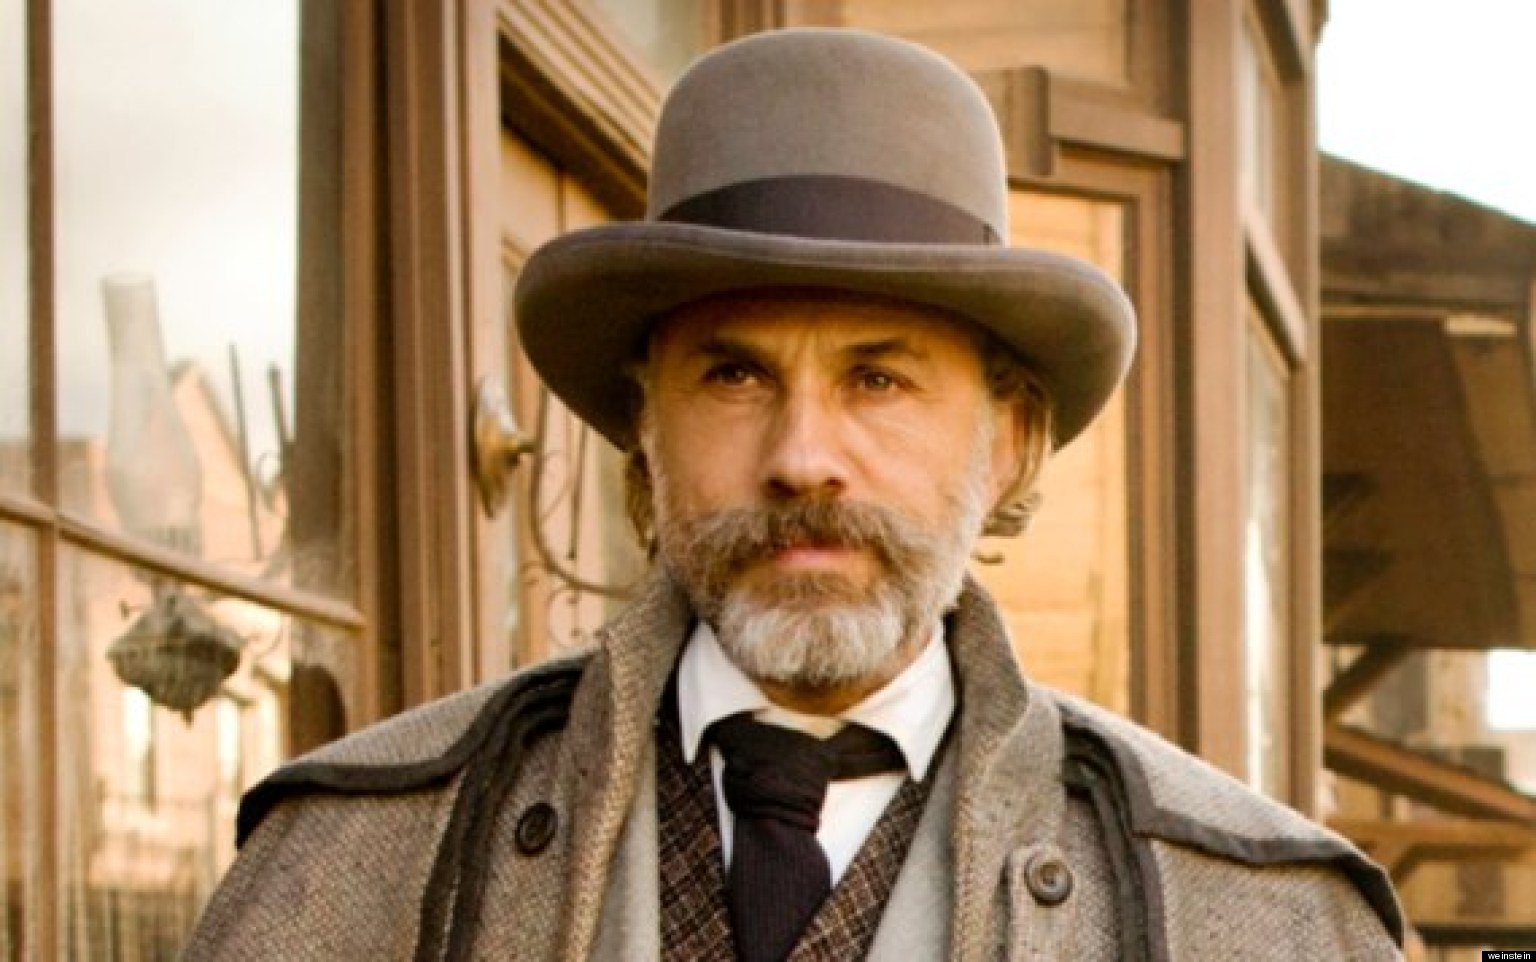 Happy birthday to a terrific, scene-stealing character actor, two-time Oscar winner Christoph Waltz! 